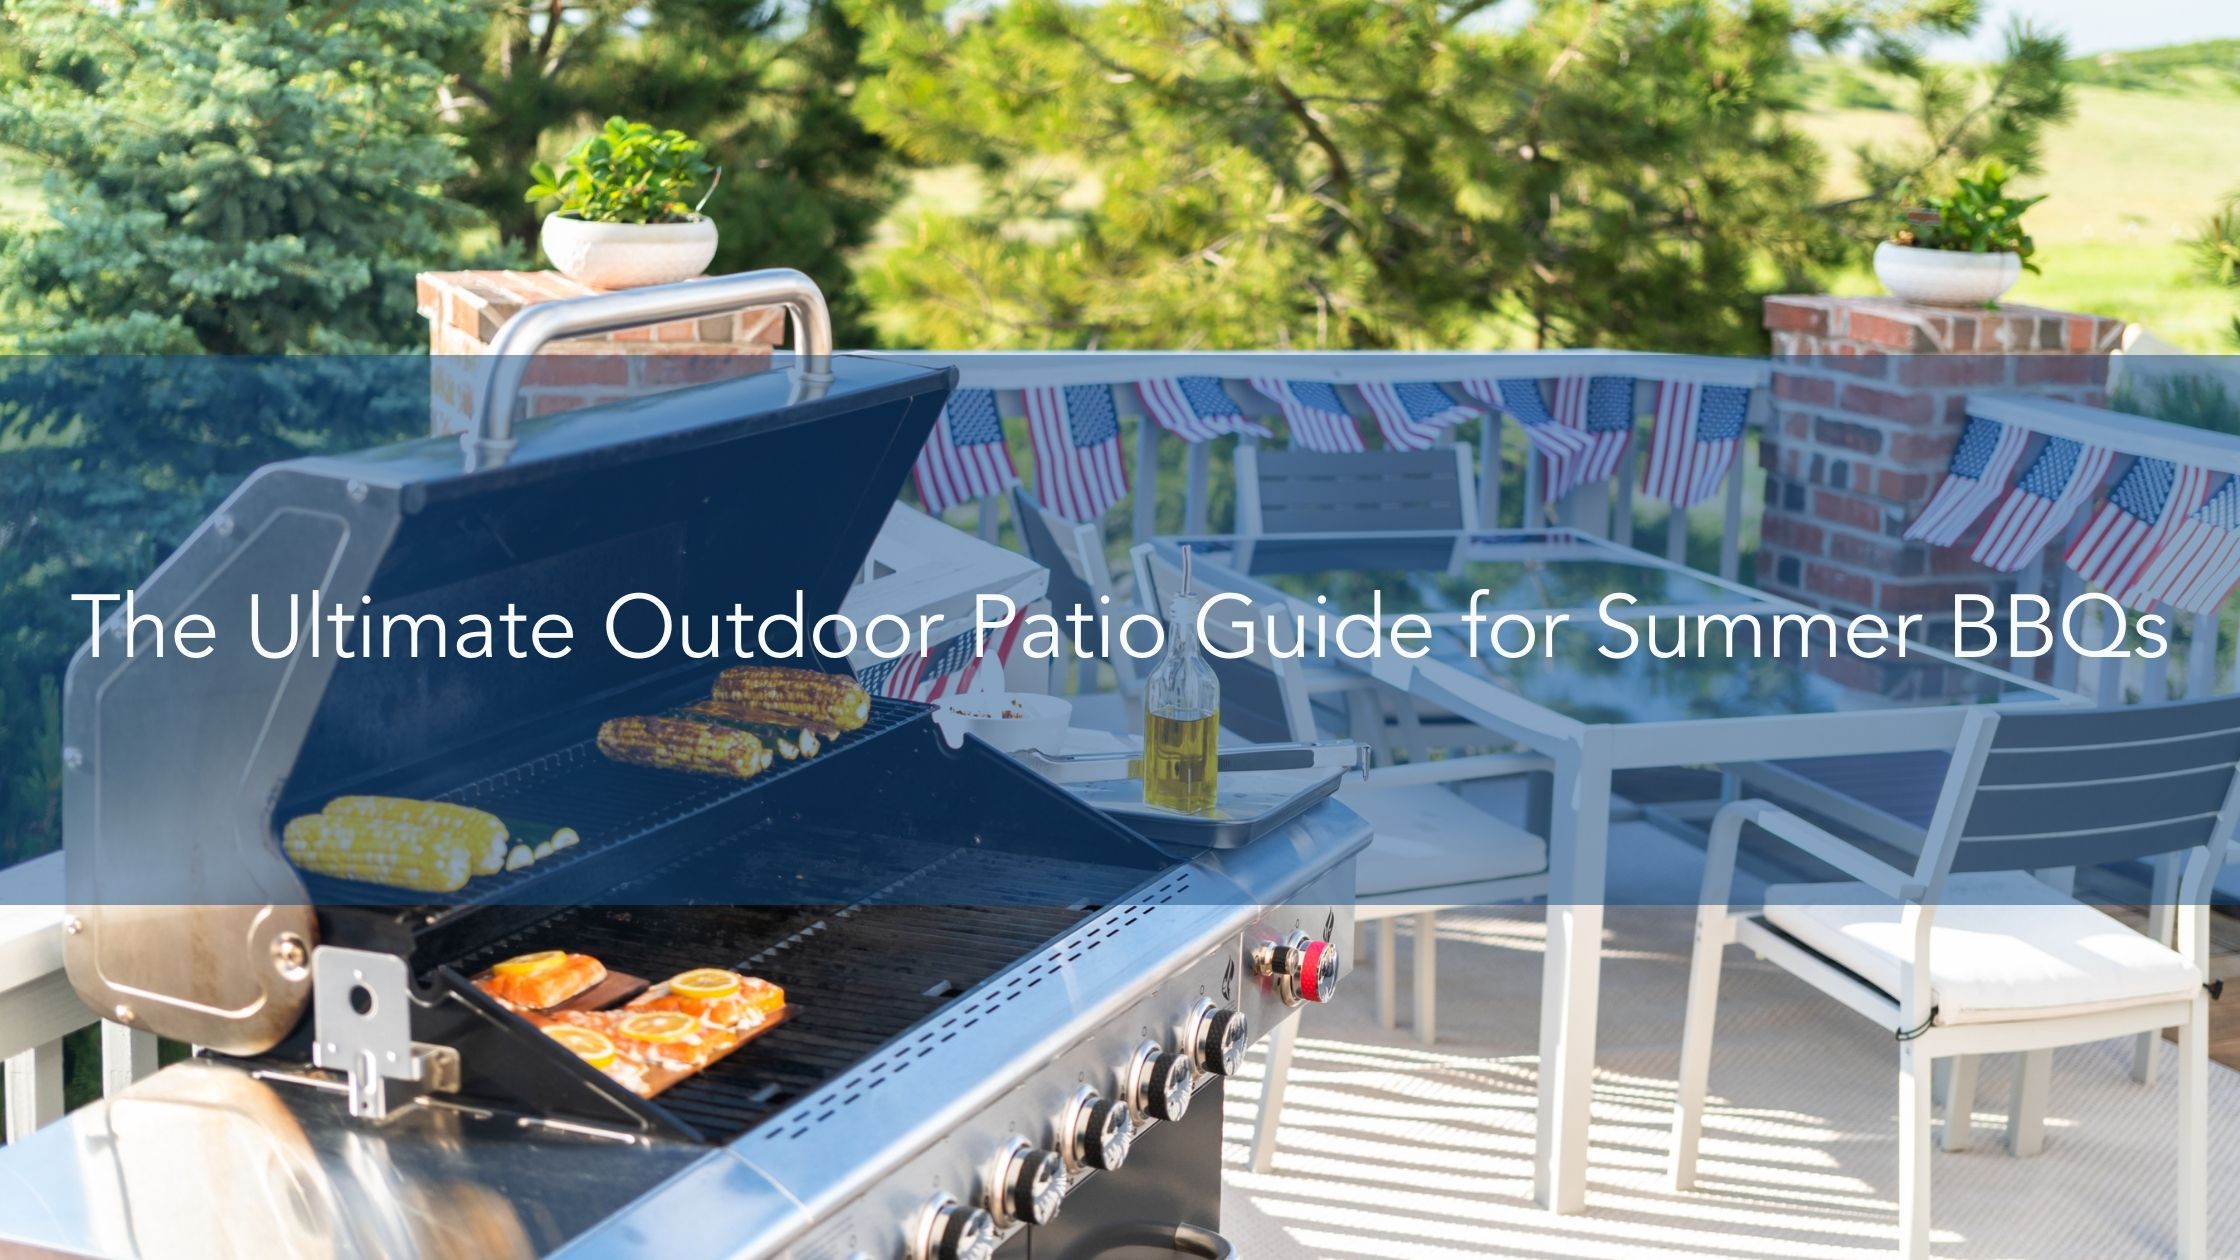 The Ultimate Outdoor Patio Guide for Summer BBQs